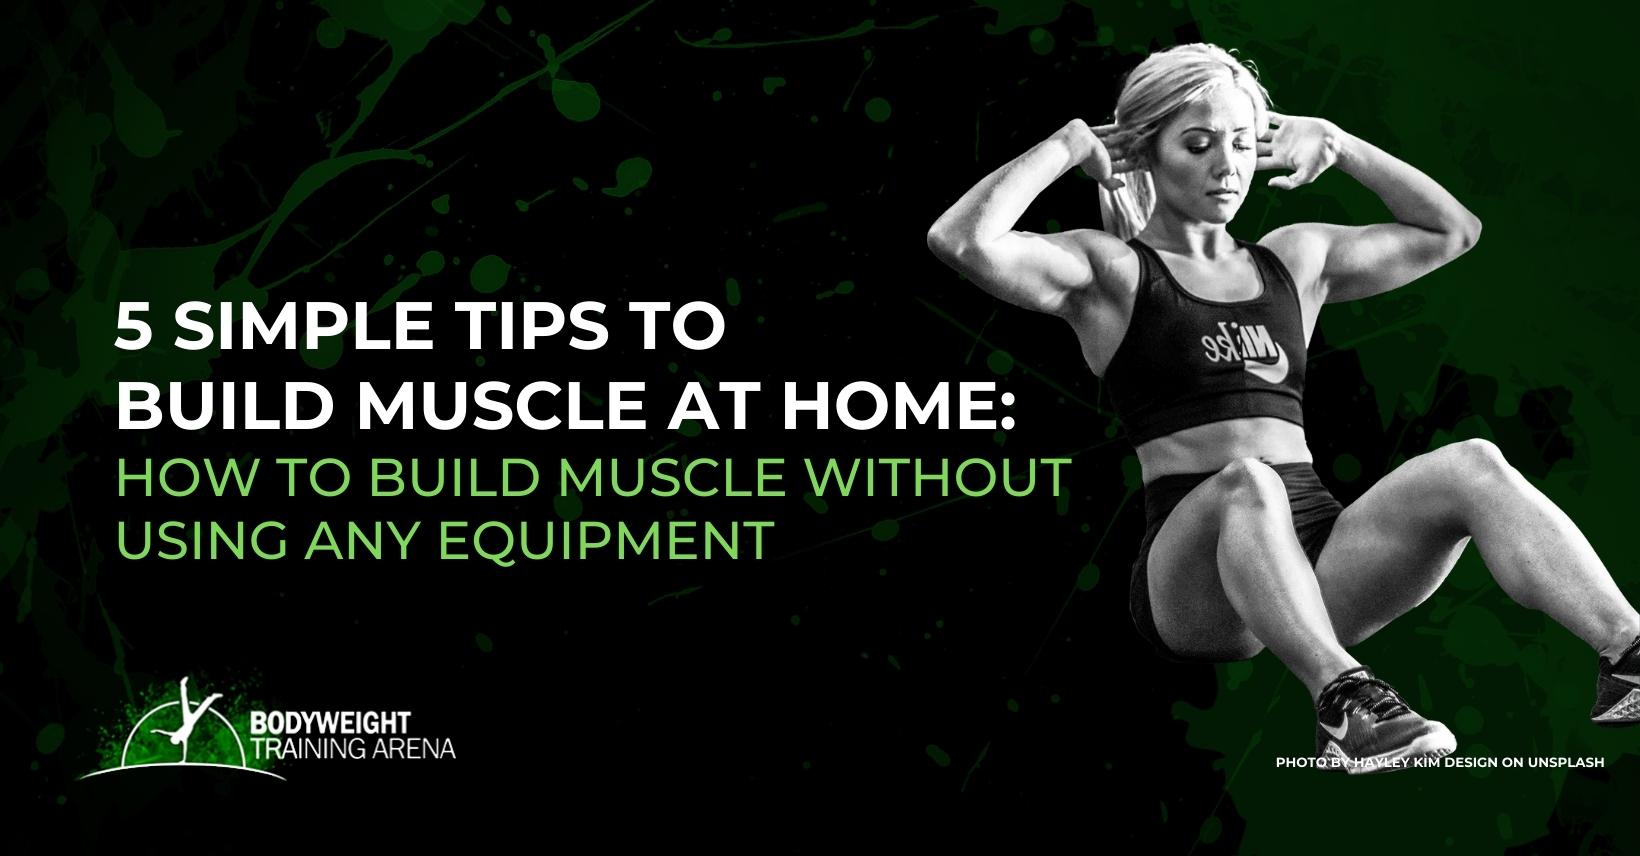 5 SIMPLE TIPS to Build Muscle at Home: How to build muscle without using any equipment